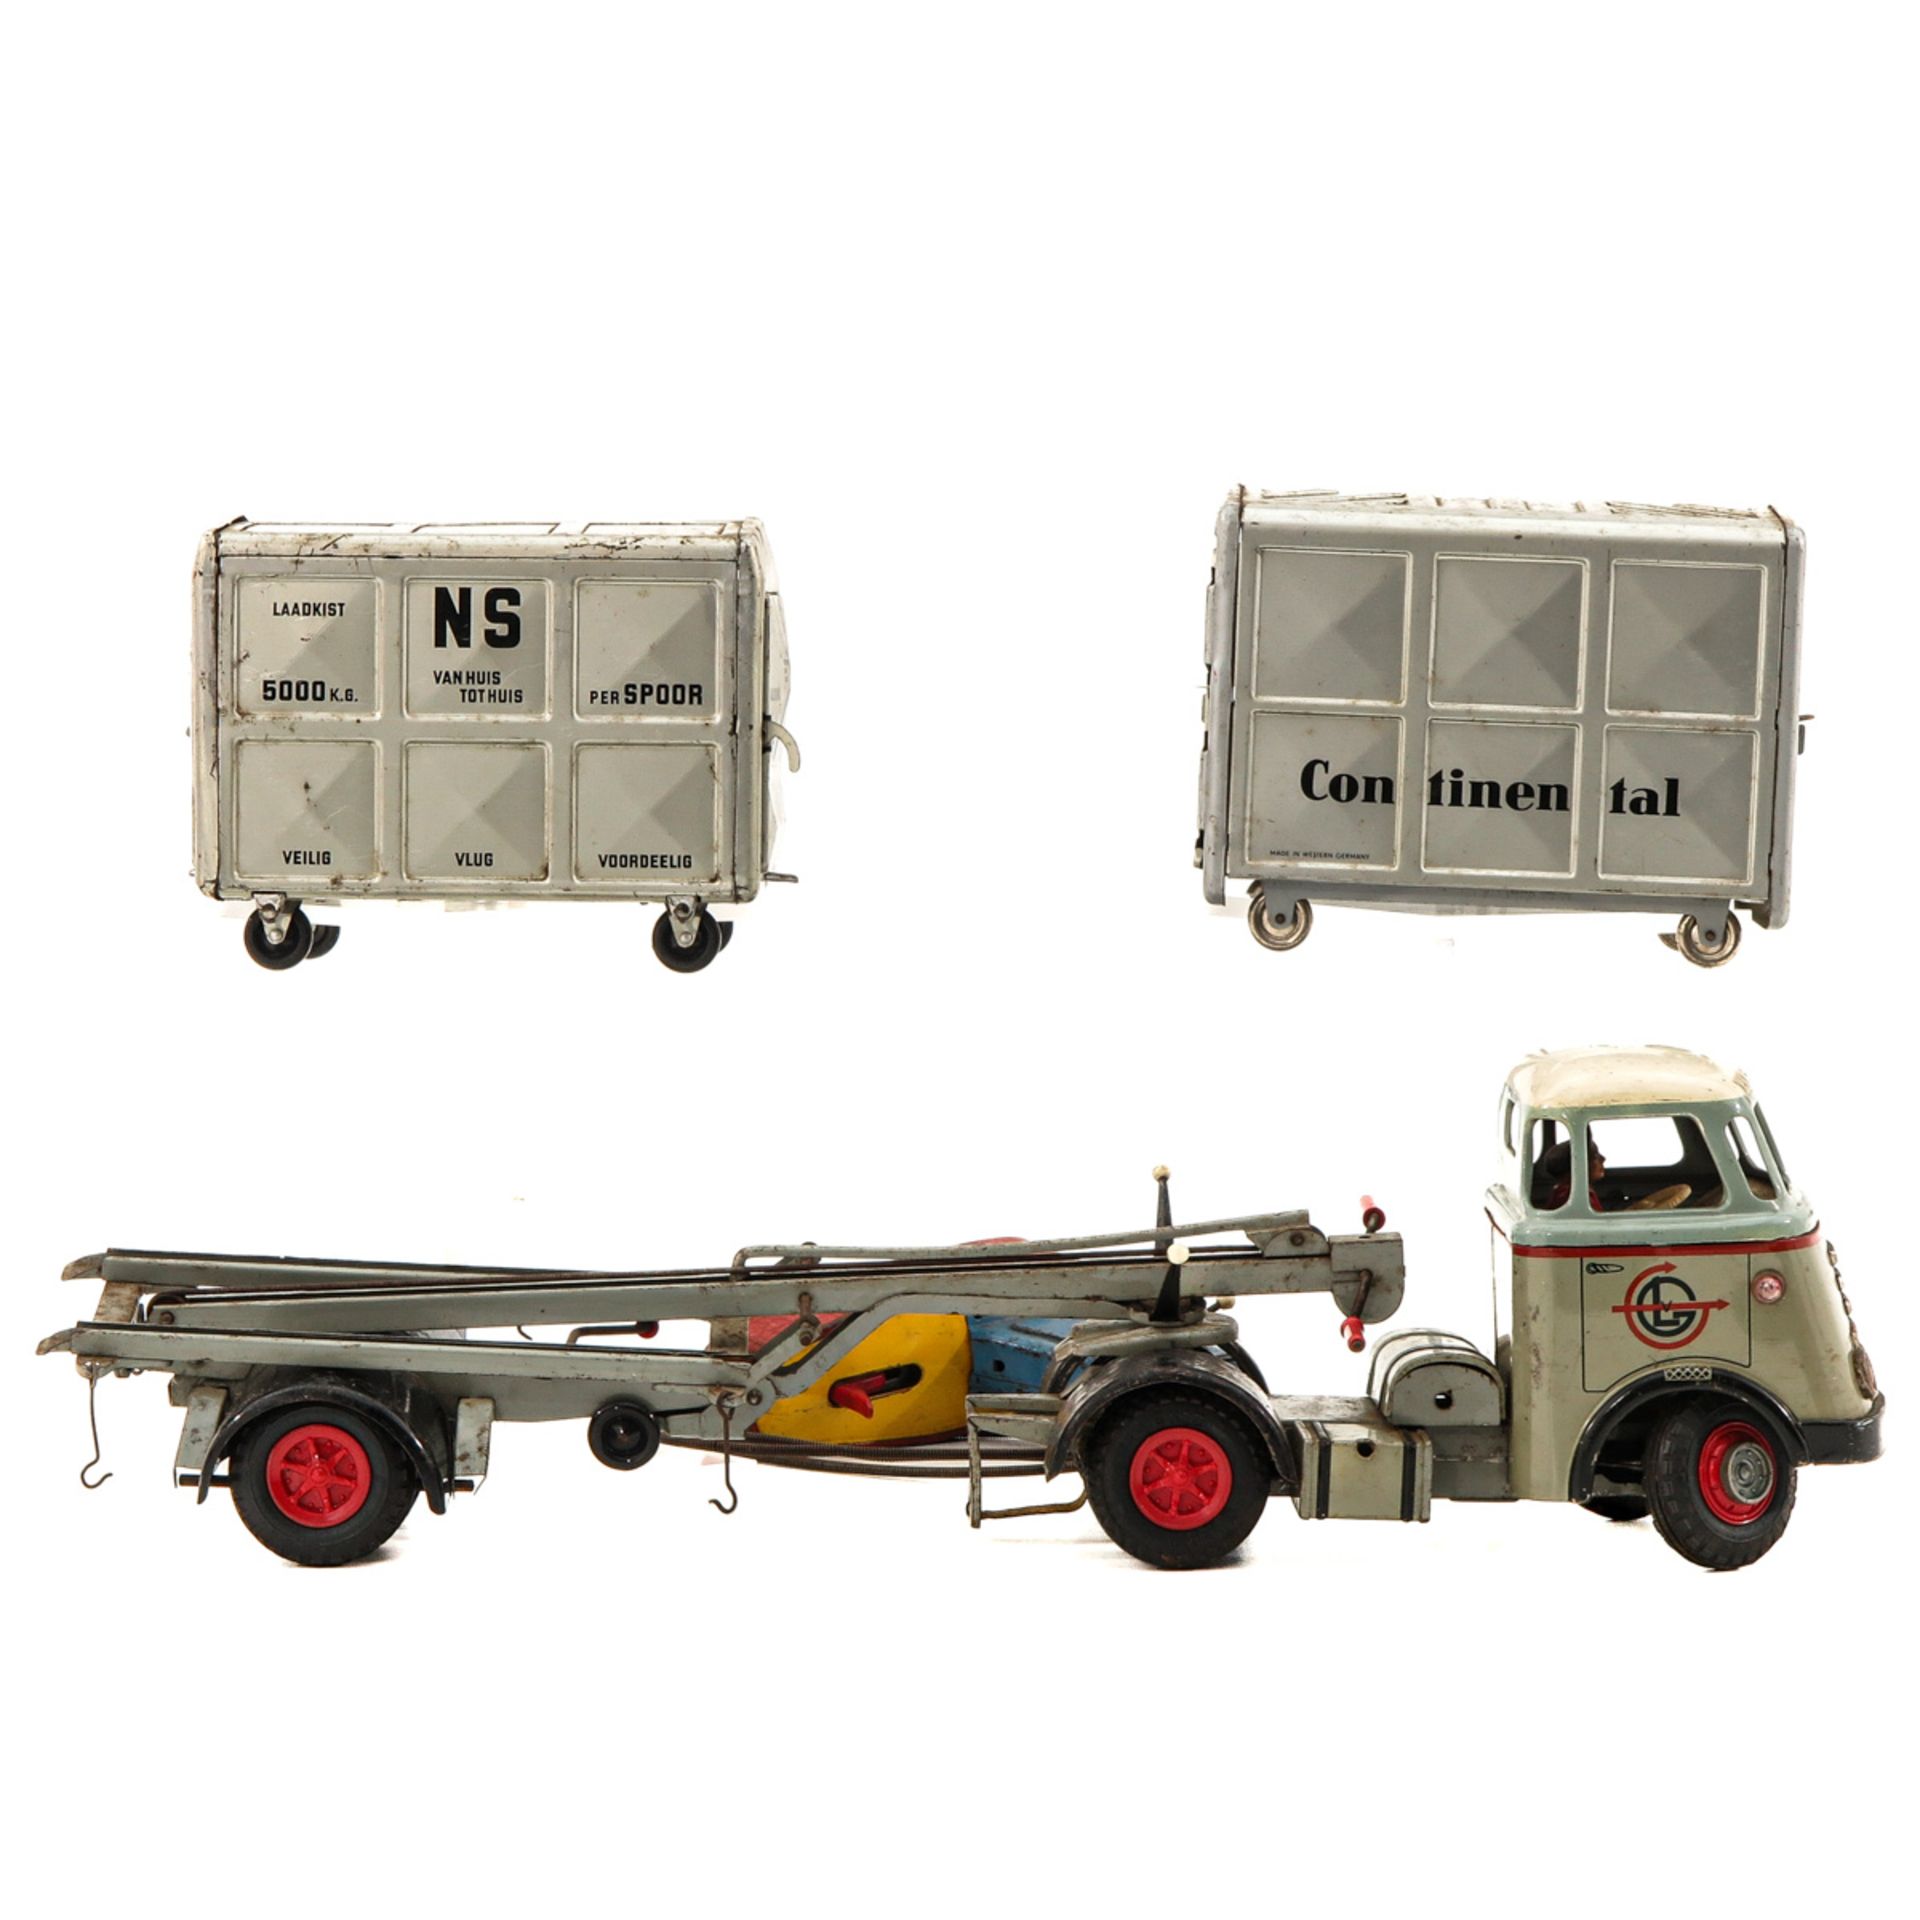 A German Toy Truck with Container Cars - Image 3 of 10